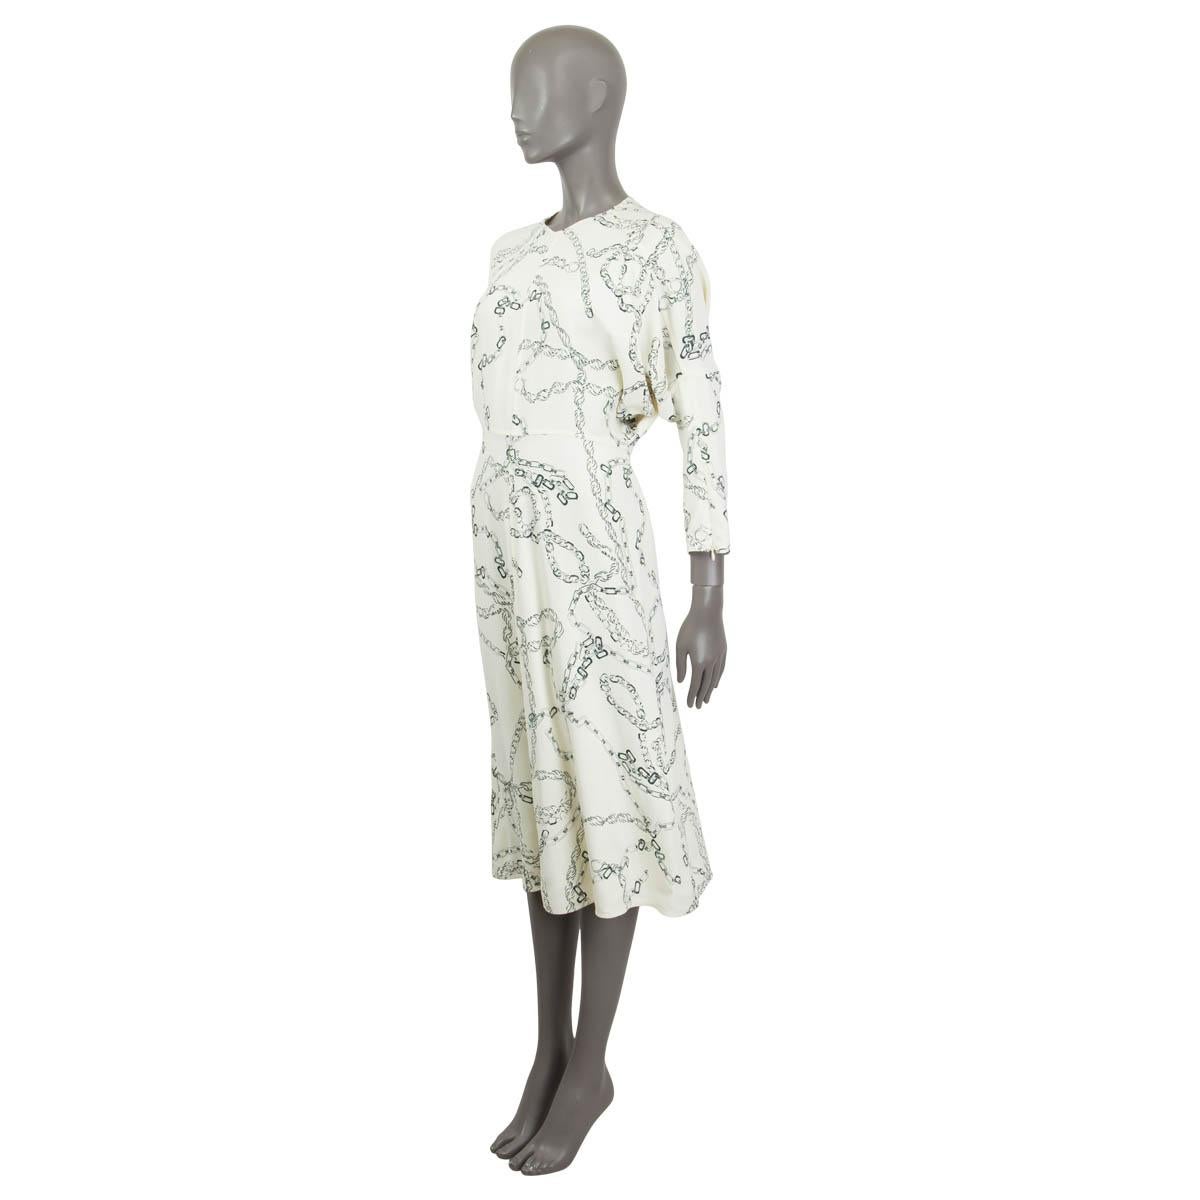 100% authentic Victoria Beckham chain-link print midi dress in cream and grey stretch viscose (96%) and elastane (4%). Features long dolman sleeves (sleeve measurement taken from the neck) with concealed zip cuffs. Opens with a concealed zipper and